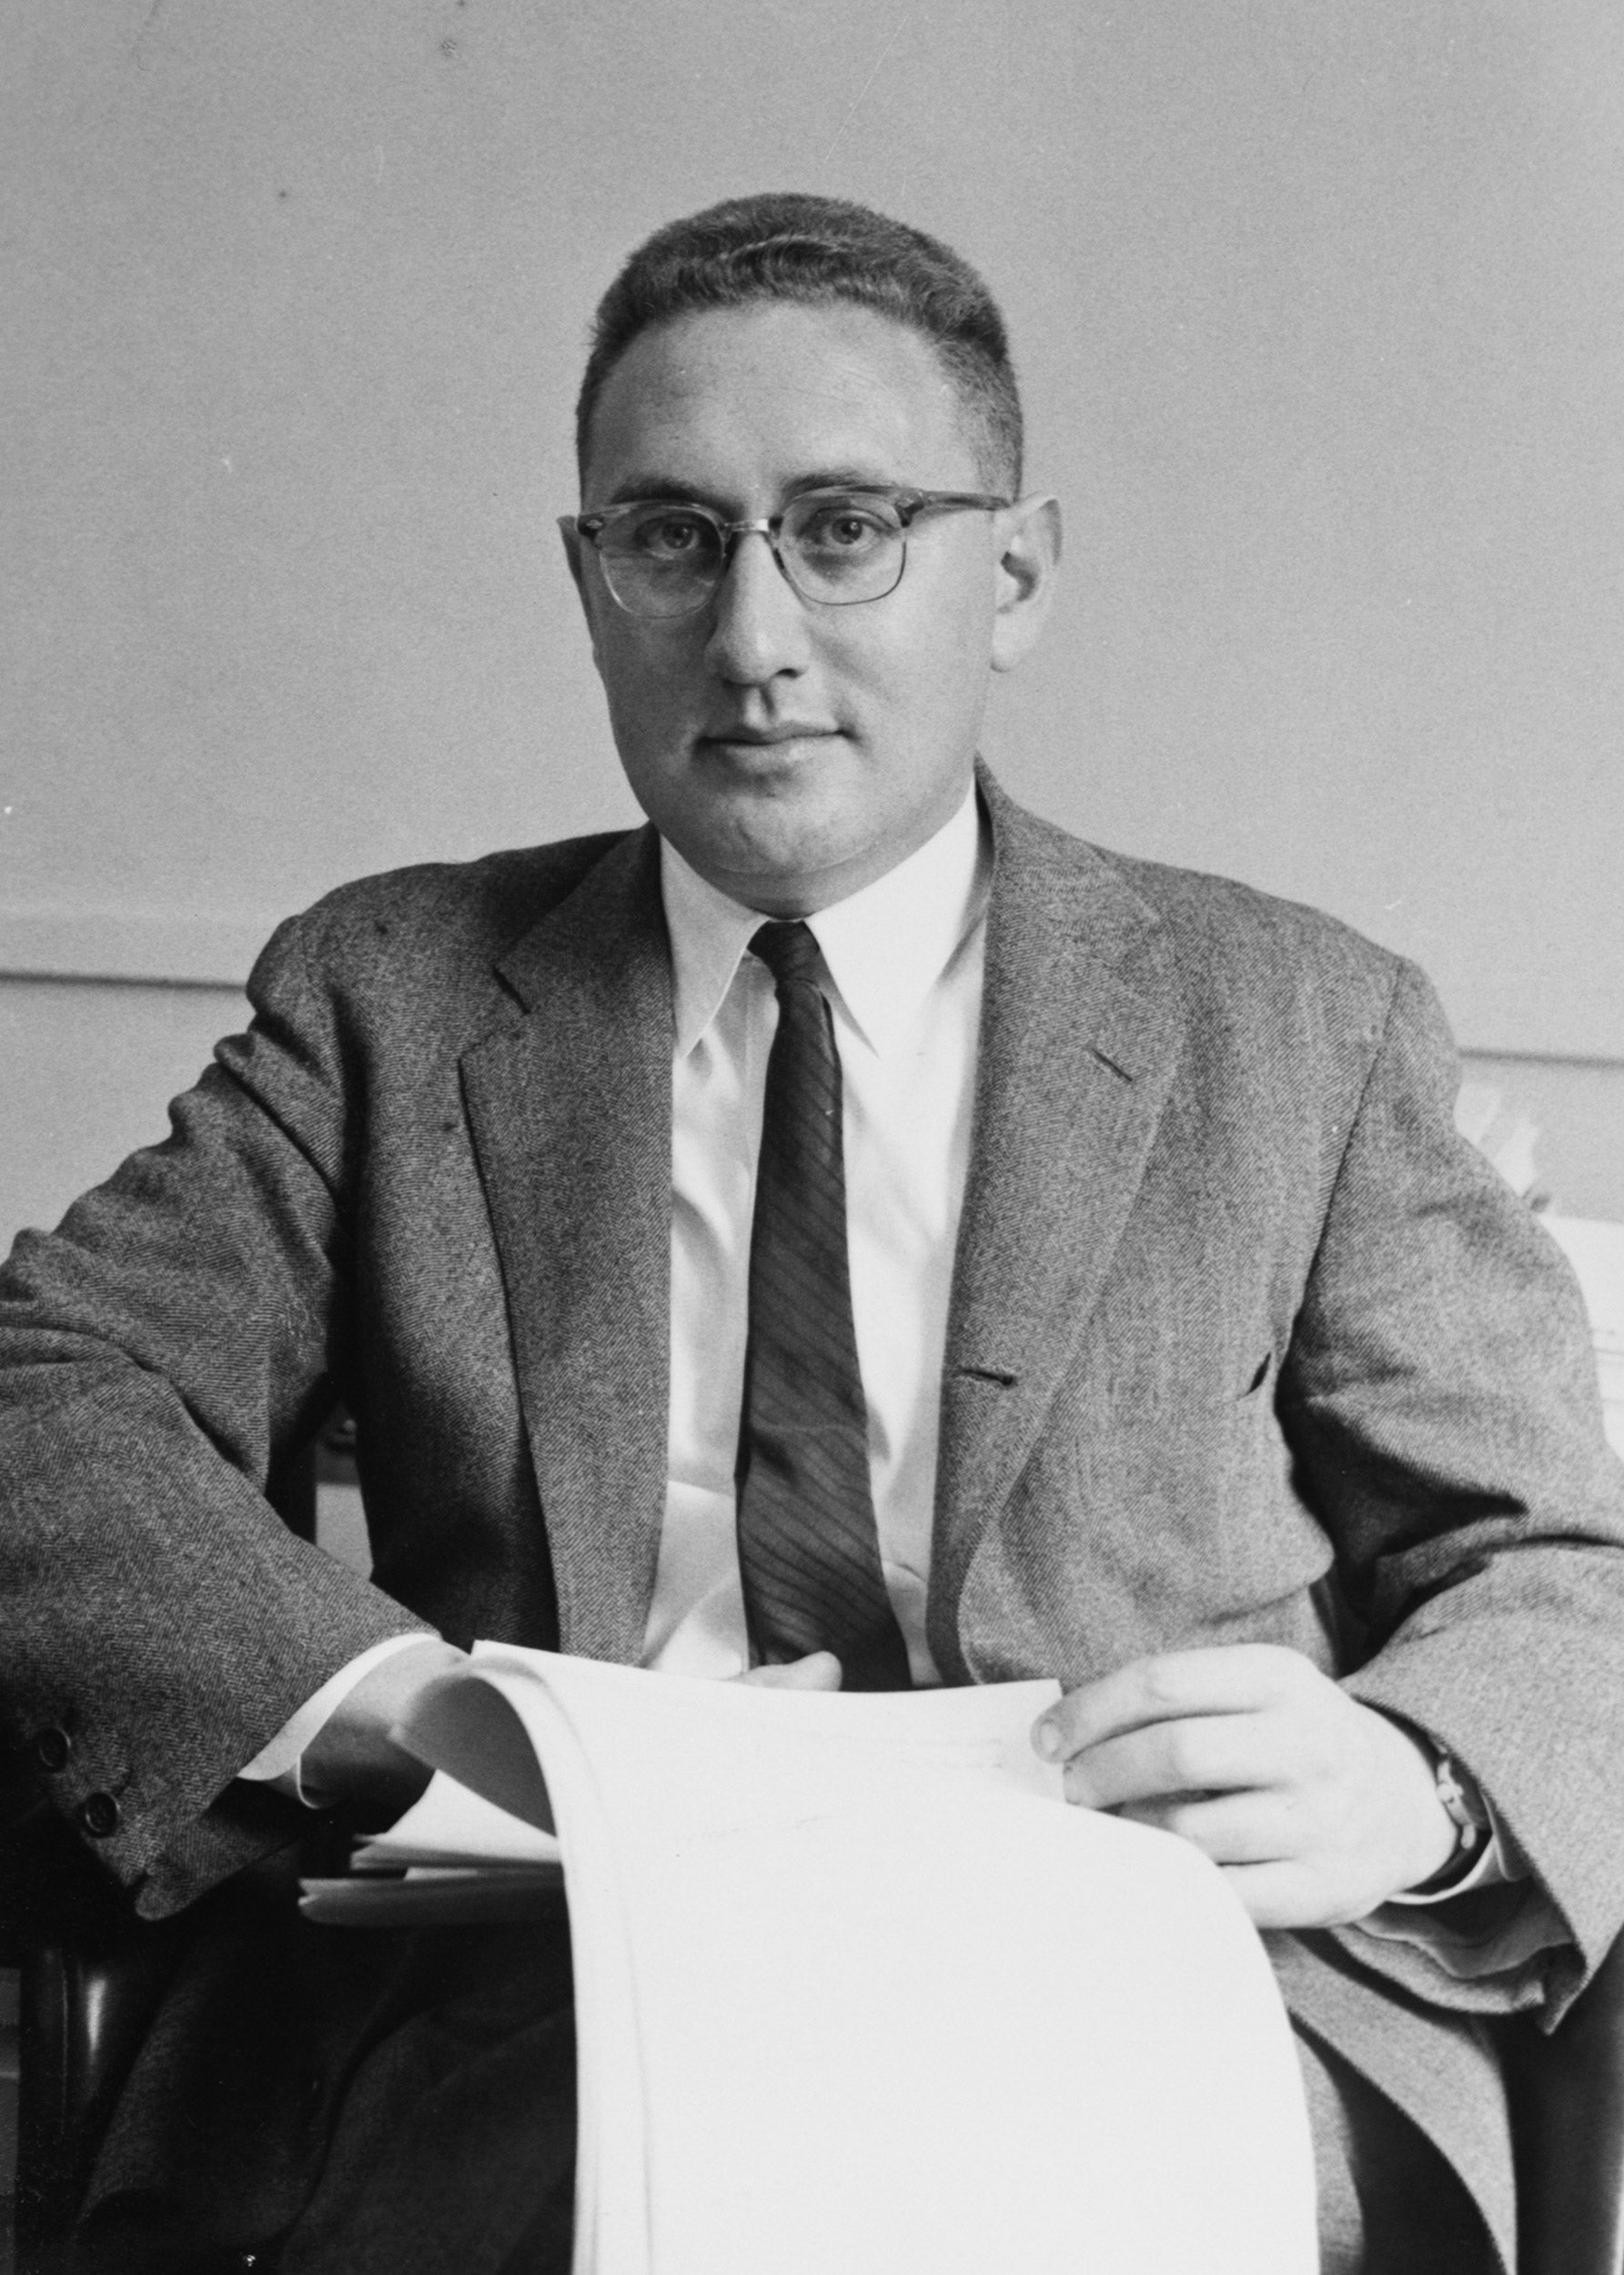 A photo from 1959 of Henry A. Kissinger, Professor of Government at Harvard University.